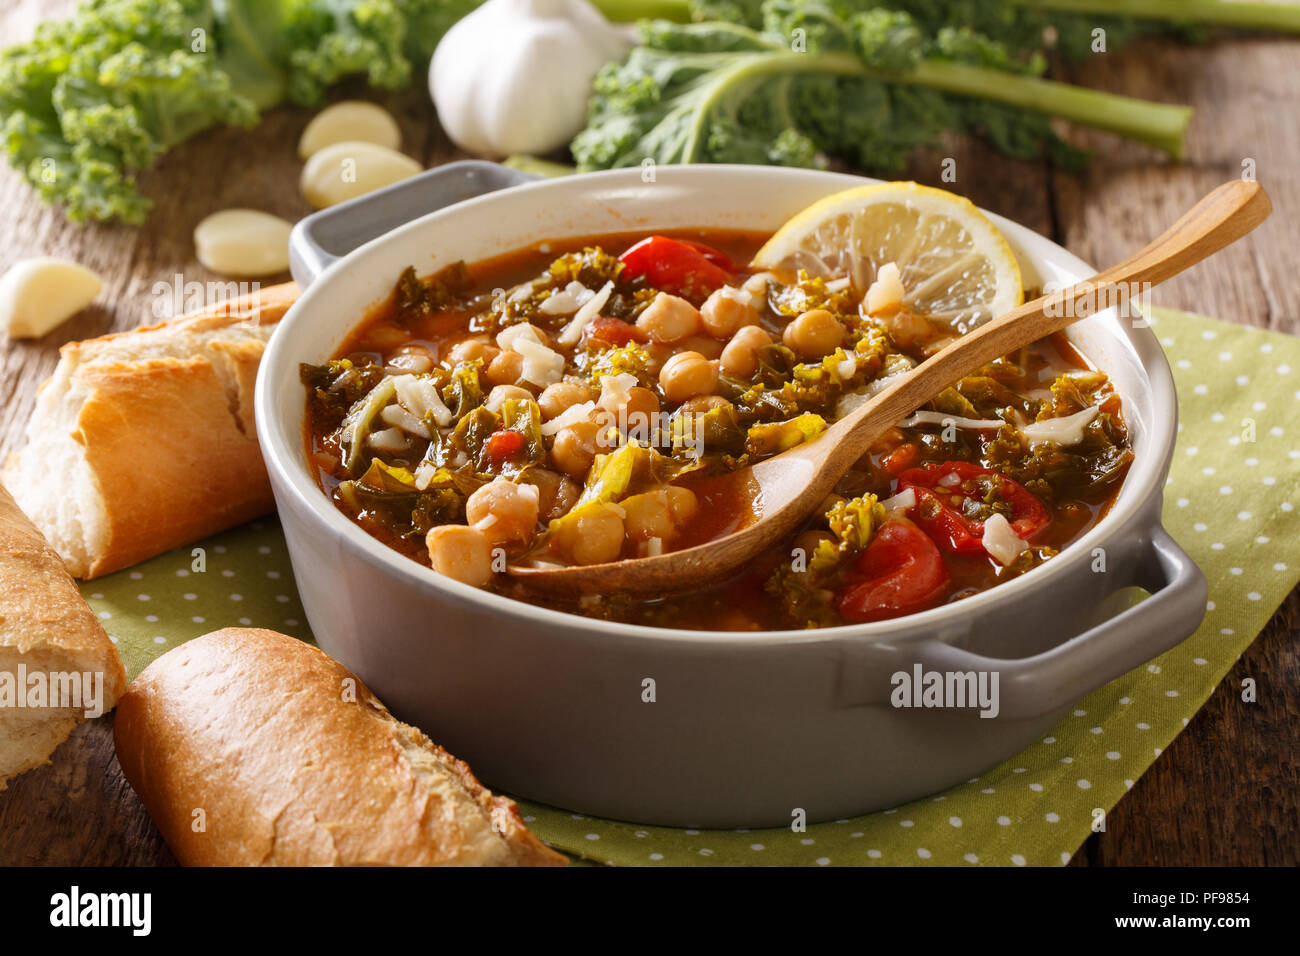 Vegetable stew of chickpeas, kale, tomatoes, garlic and potatoes with lemon close up in a bowl on the table. horizontal Stock Photo